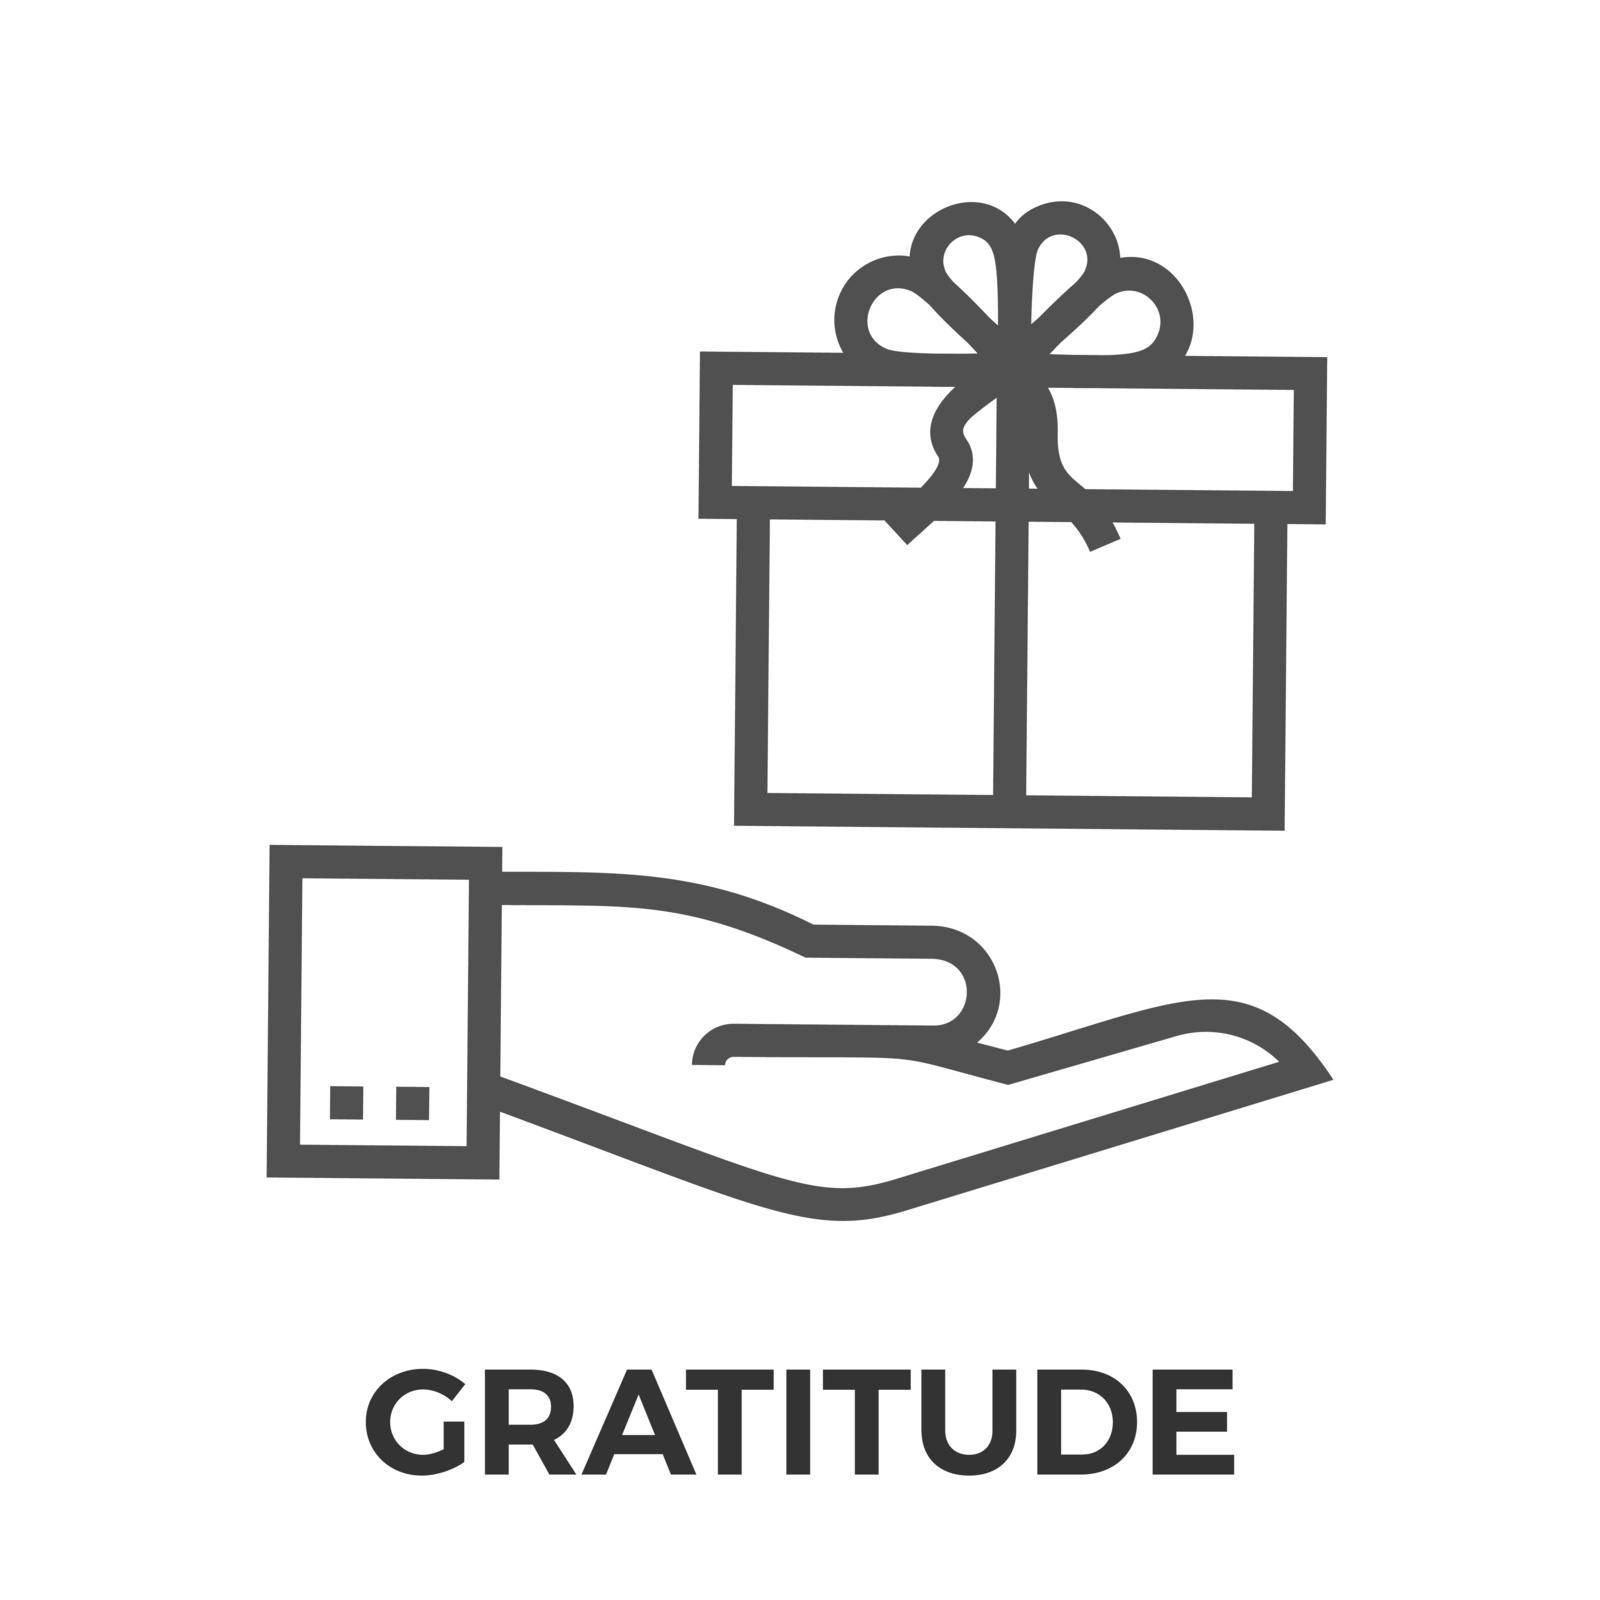 Gratitude Thin Line Vector Icon Isolated on the White Background.